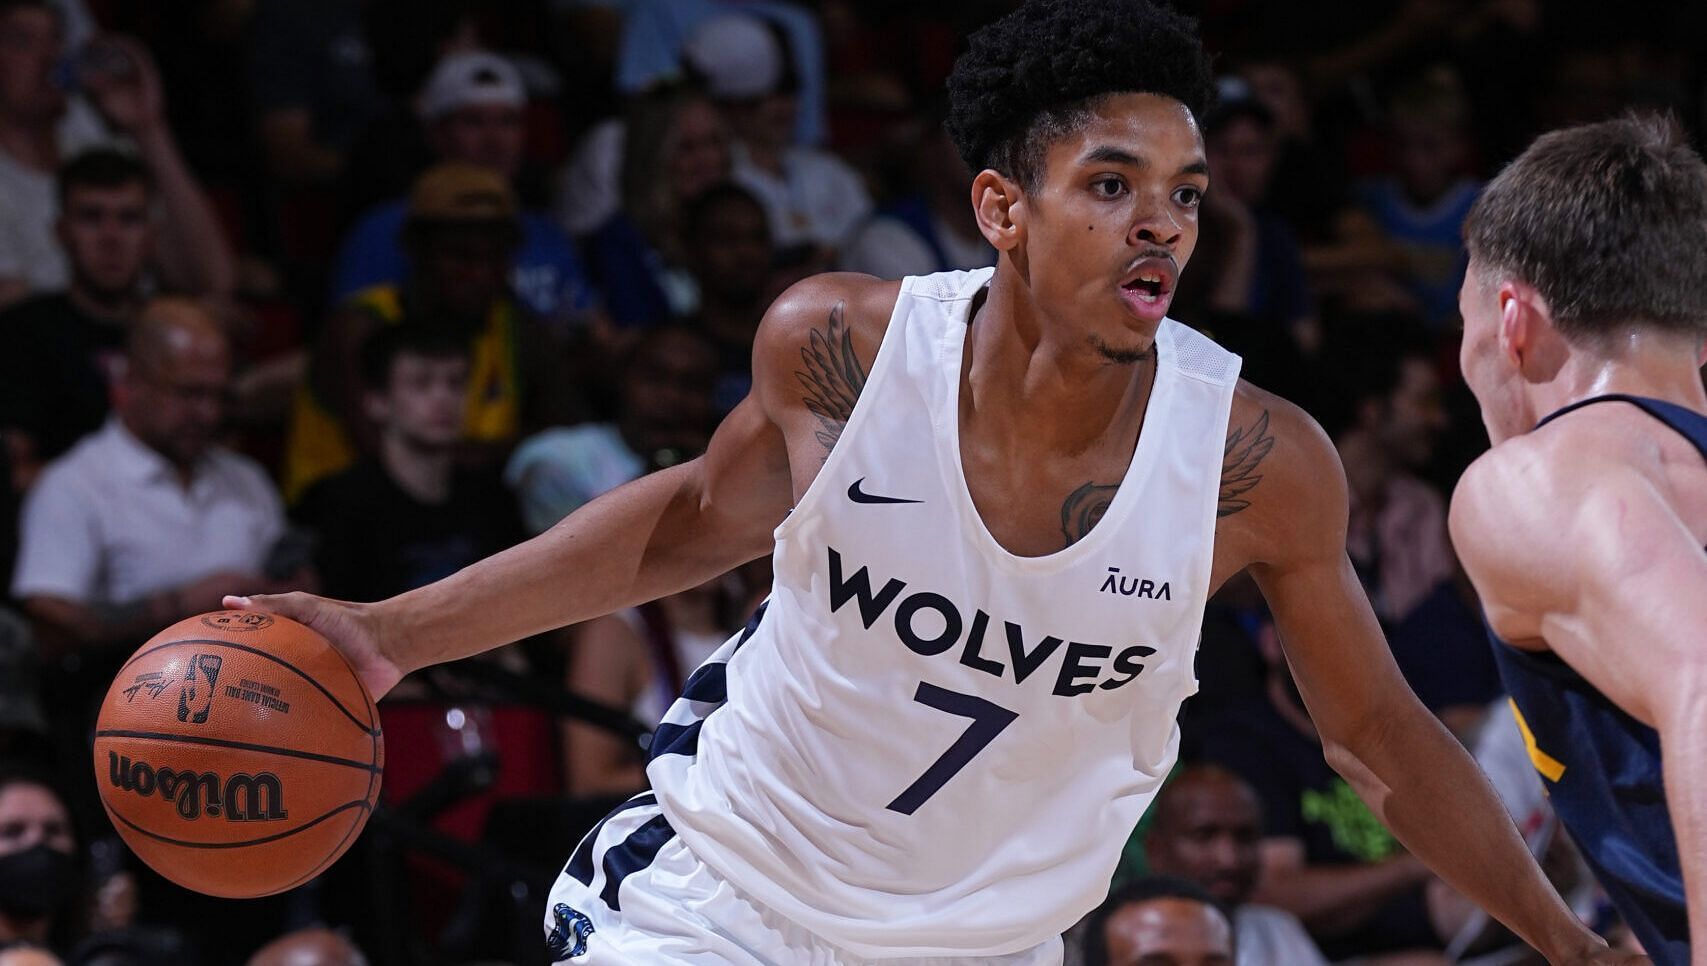 The Minnesota Timberwolves faced the Denver Nuggets in the 2022 Summer League [Source: NBA]